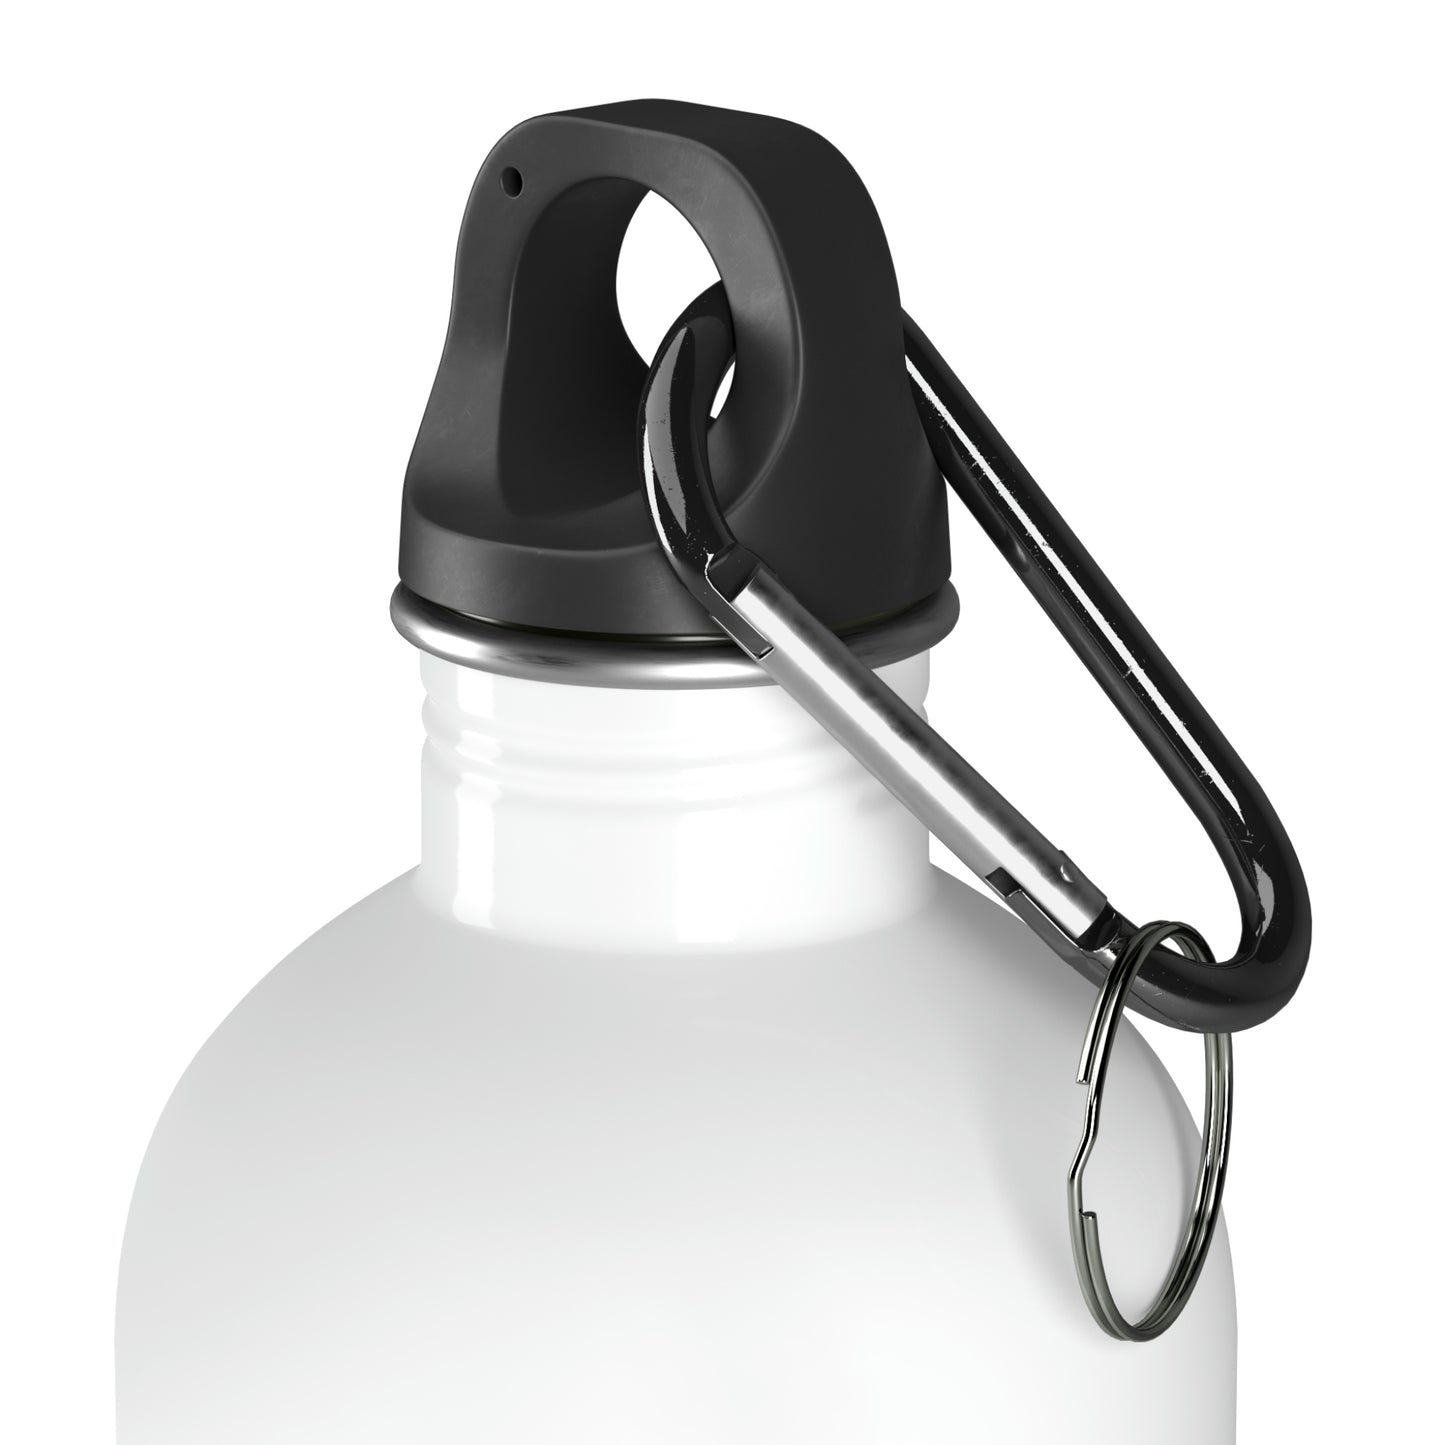 The Gleaming Relic of the Cave - The Alien Stainless Steel Water Bottle